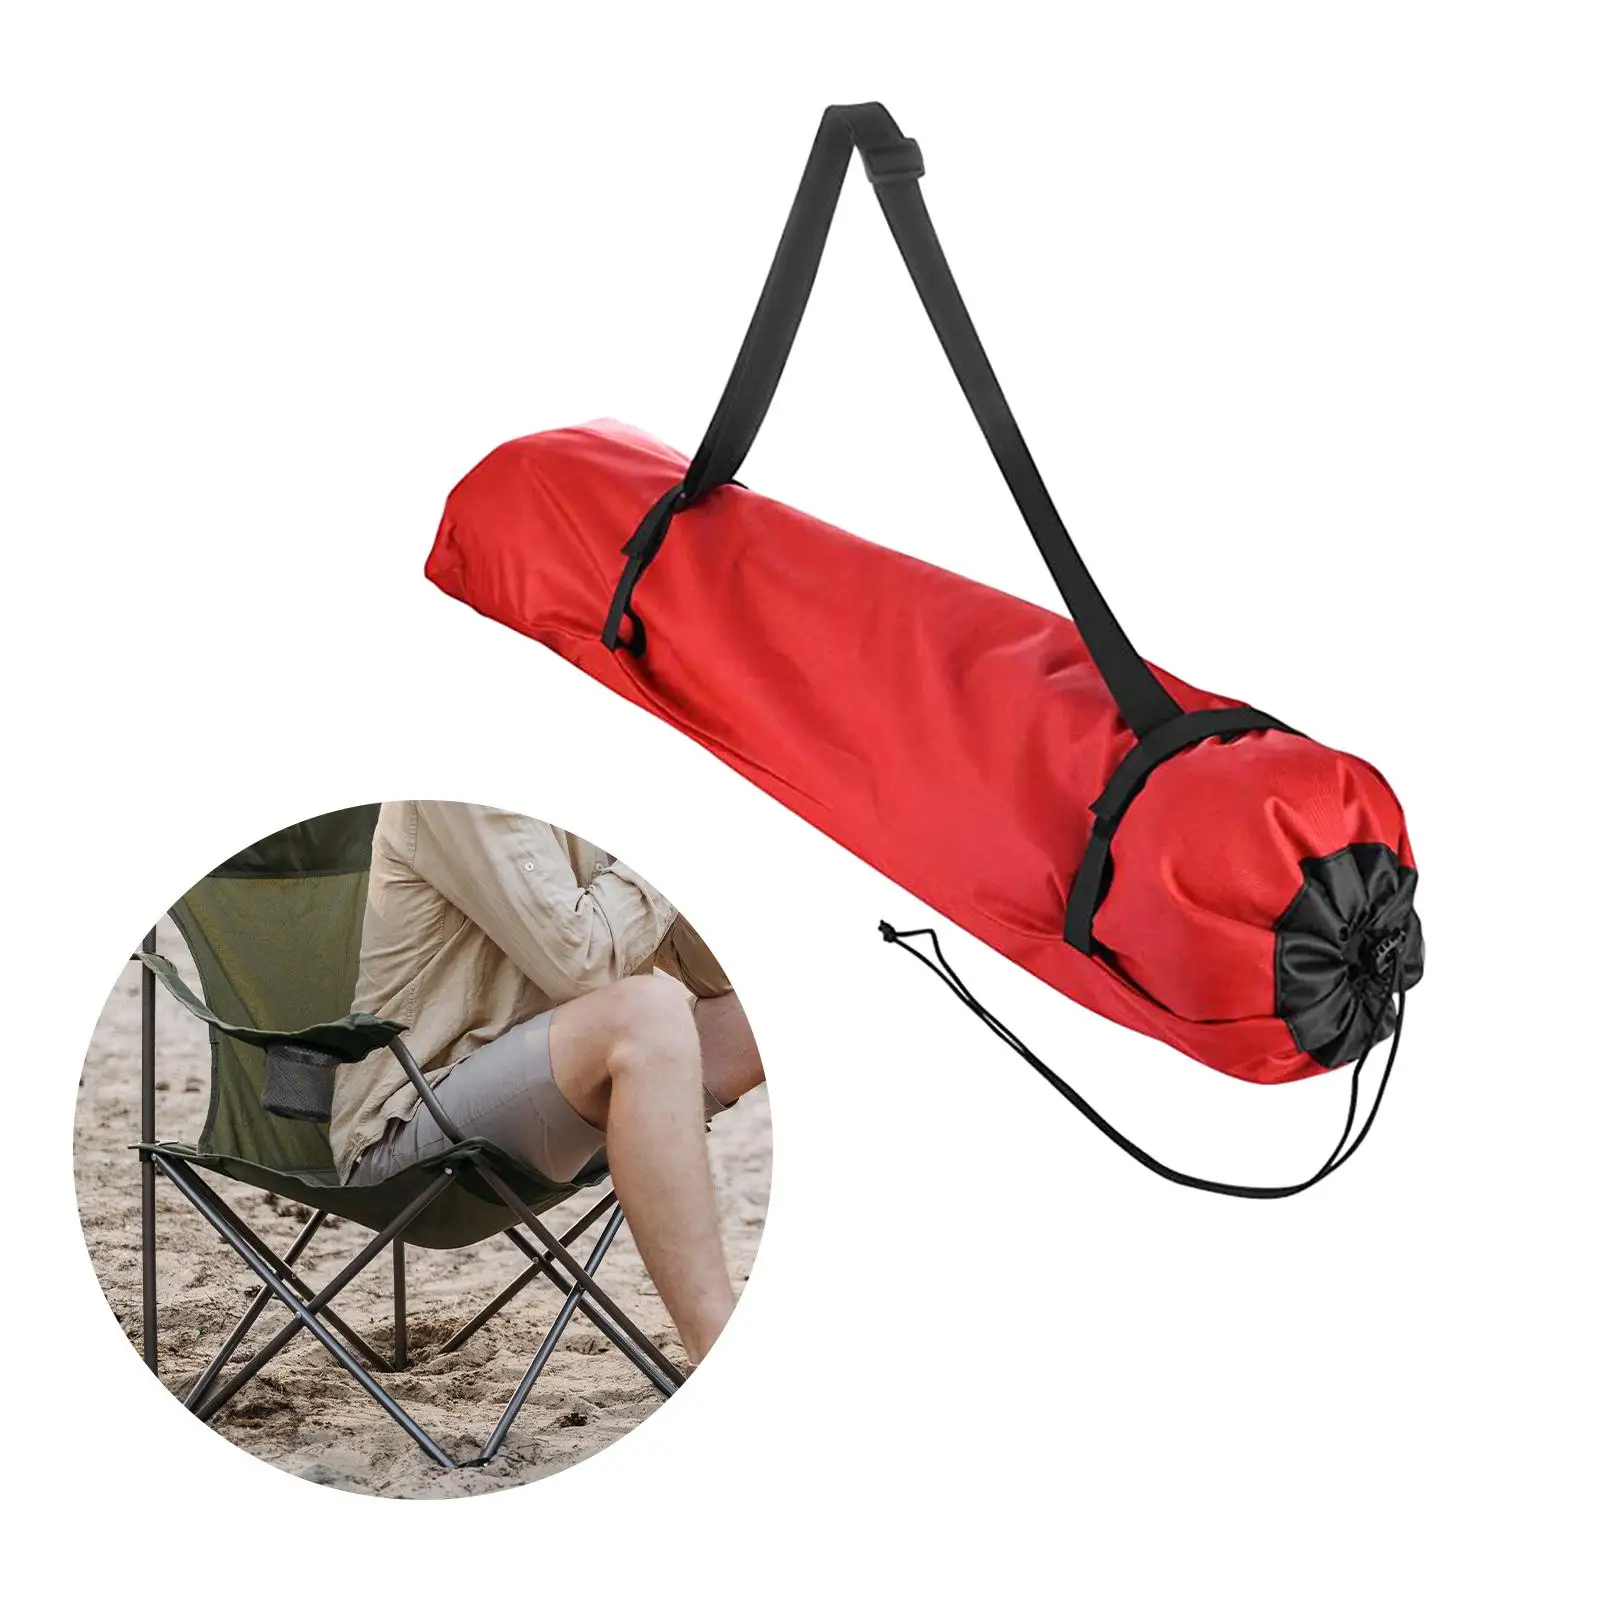 Folding Chair Carrying Bag Tent Bag with Adjustable Shoulder Strap Camping Chair Bag for Fishing BBQ Hiking Outdoor Backpacking